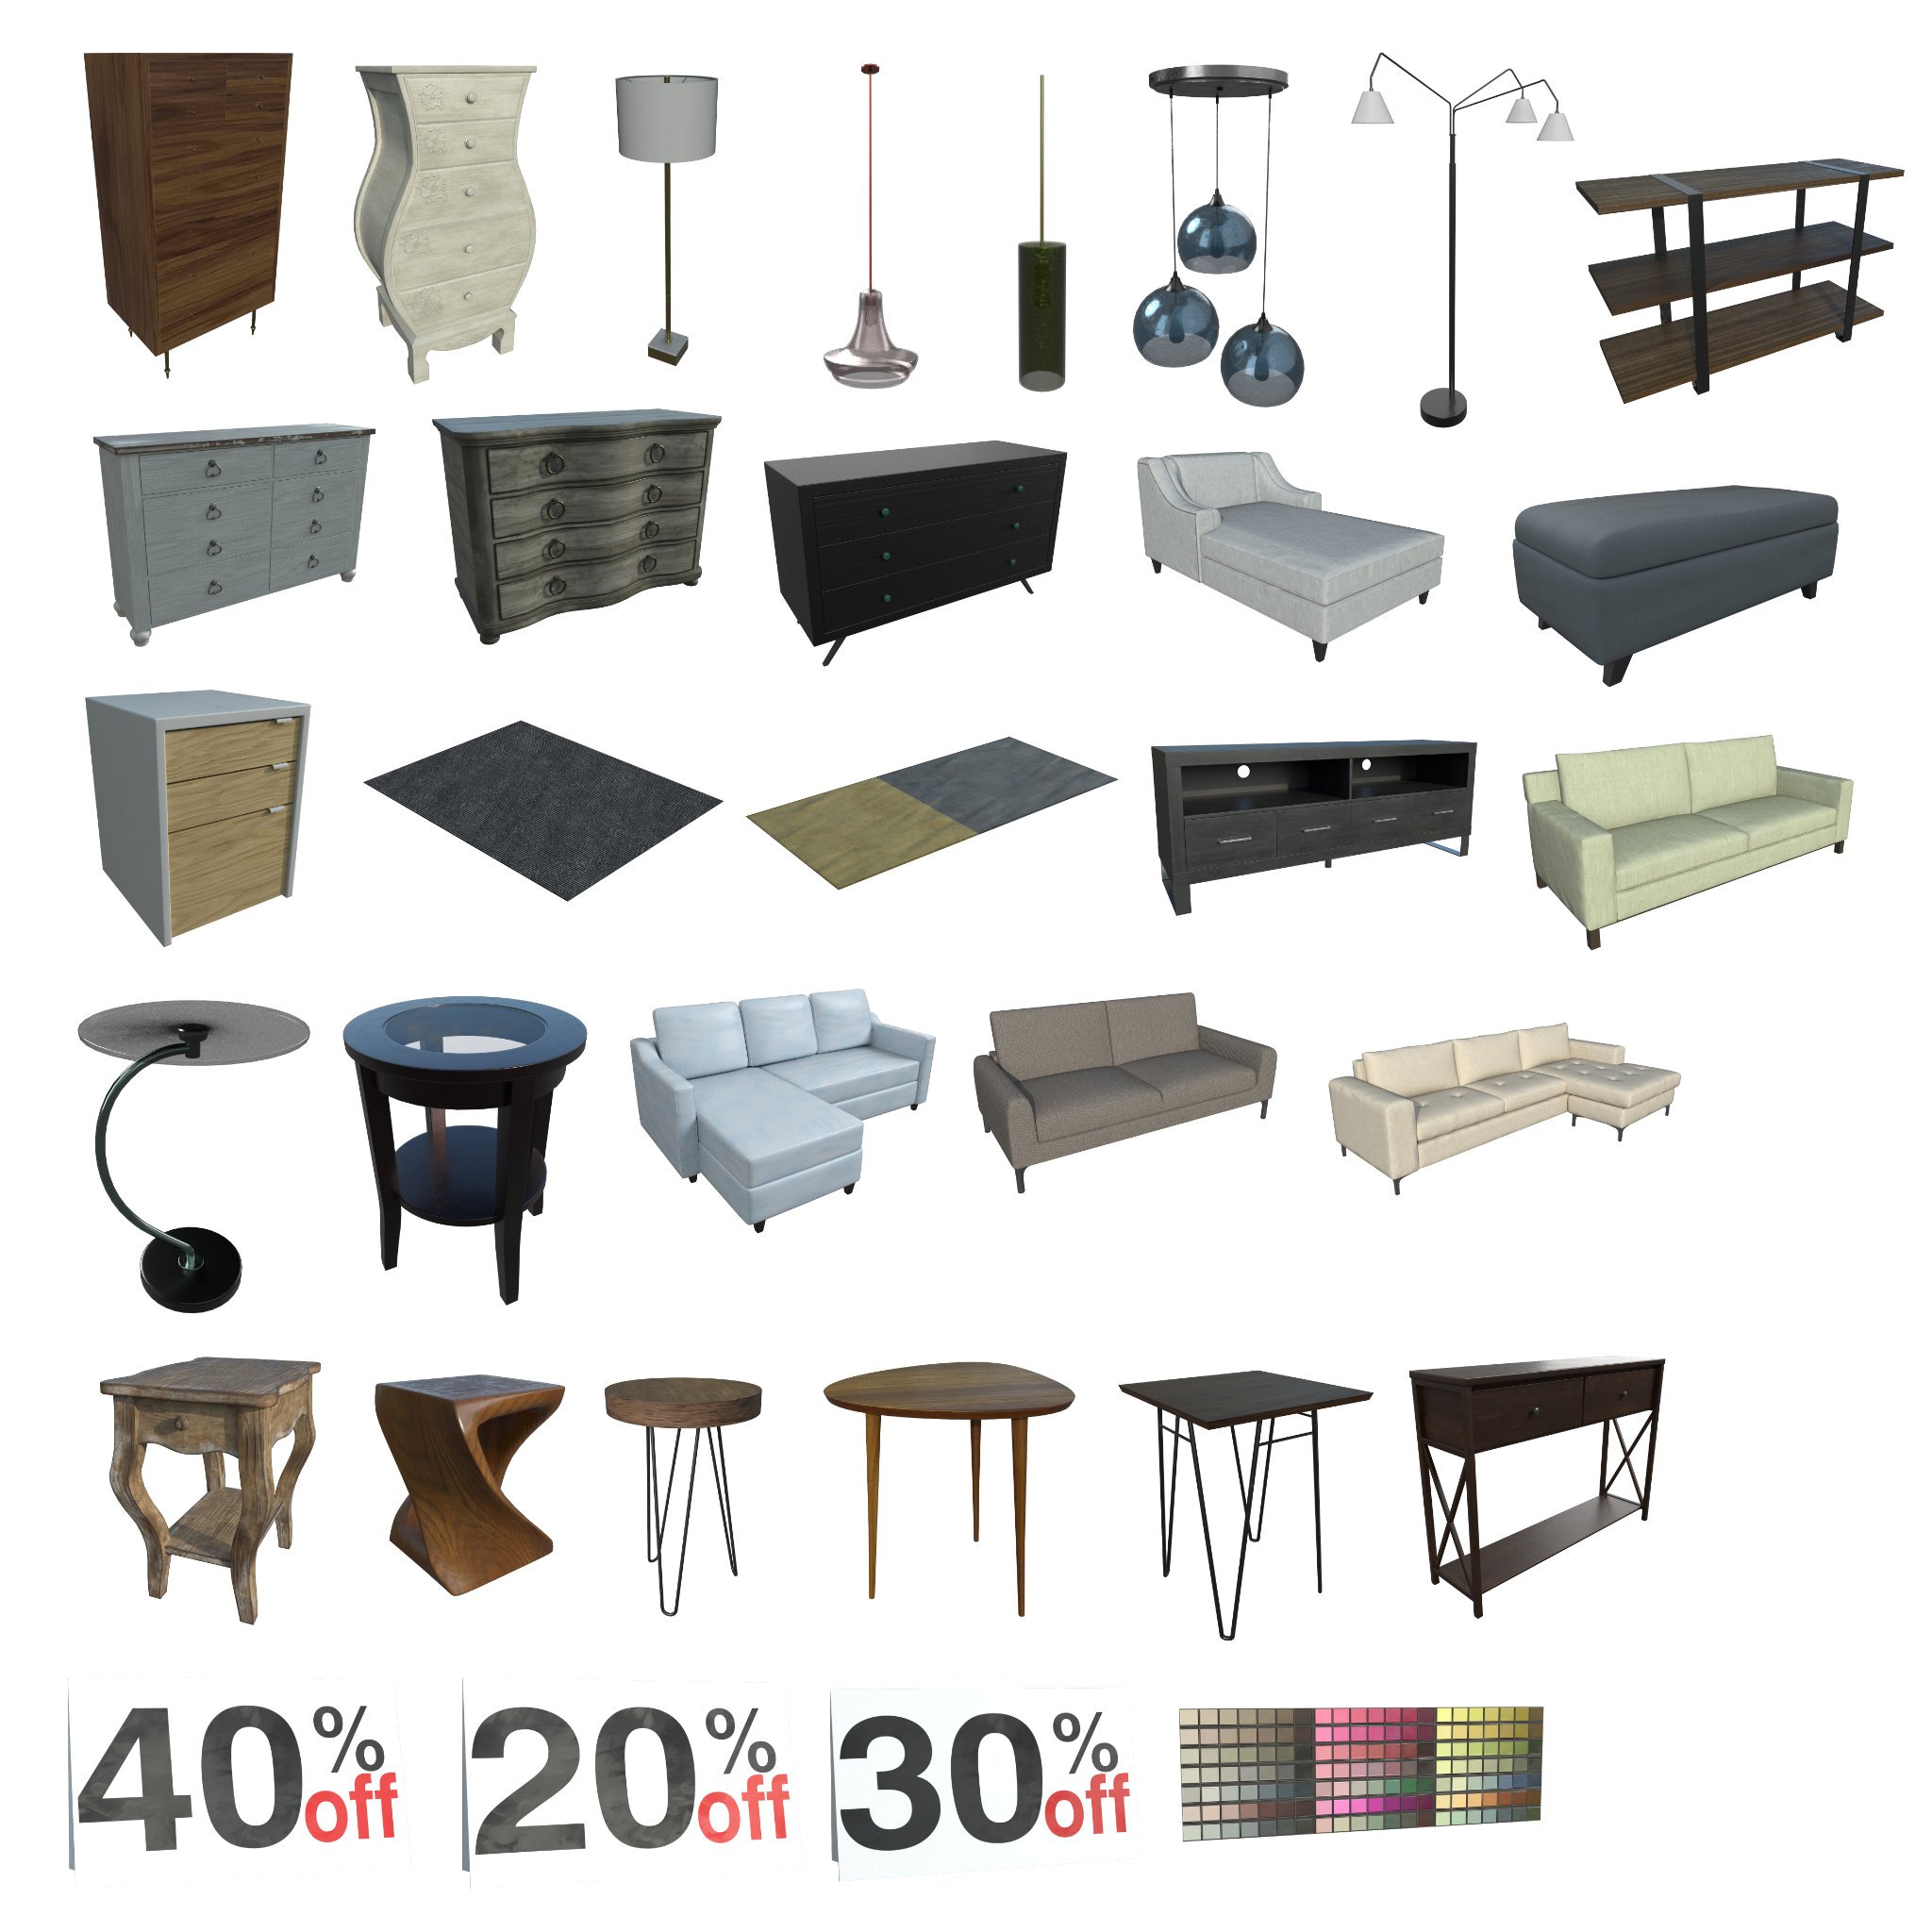 FG Wooden Furniture Store by: IronmanFugazi1968, 3D Models by Daz 3D